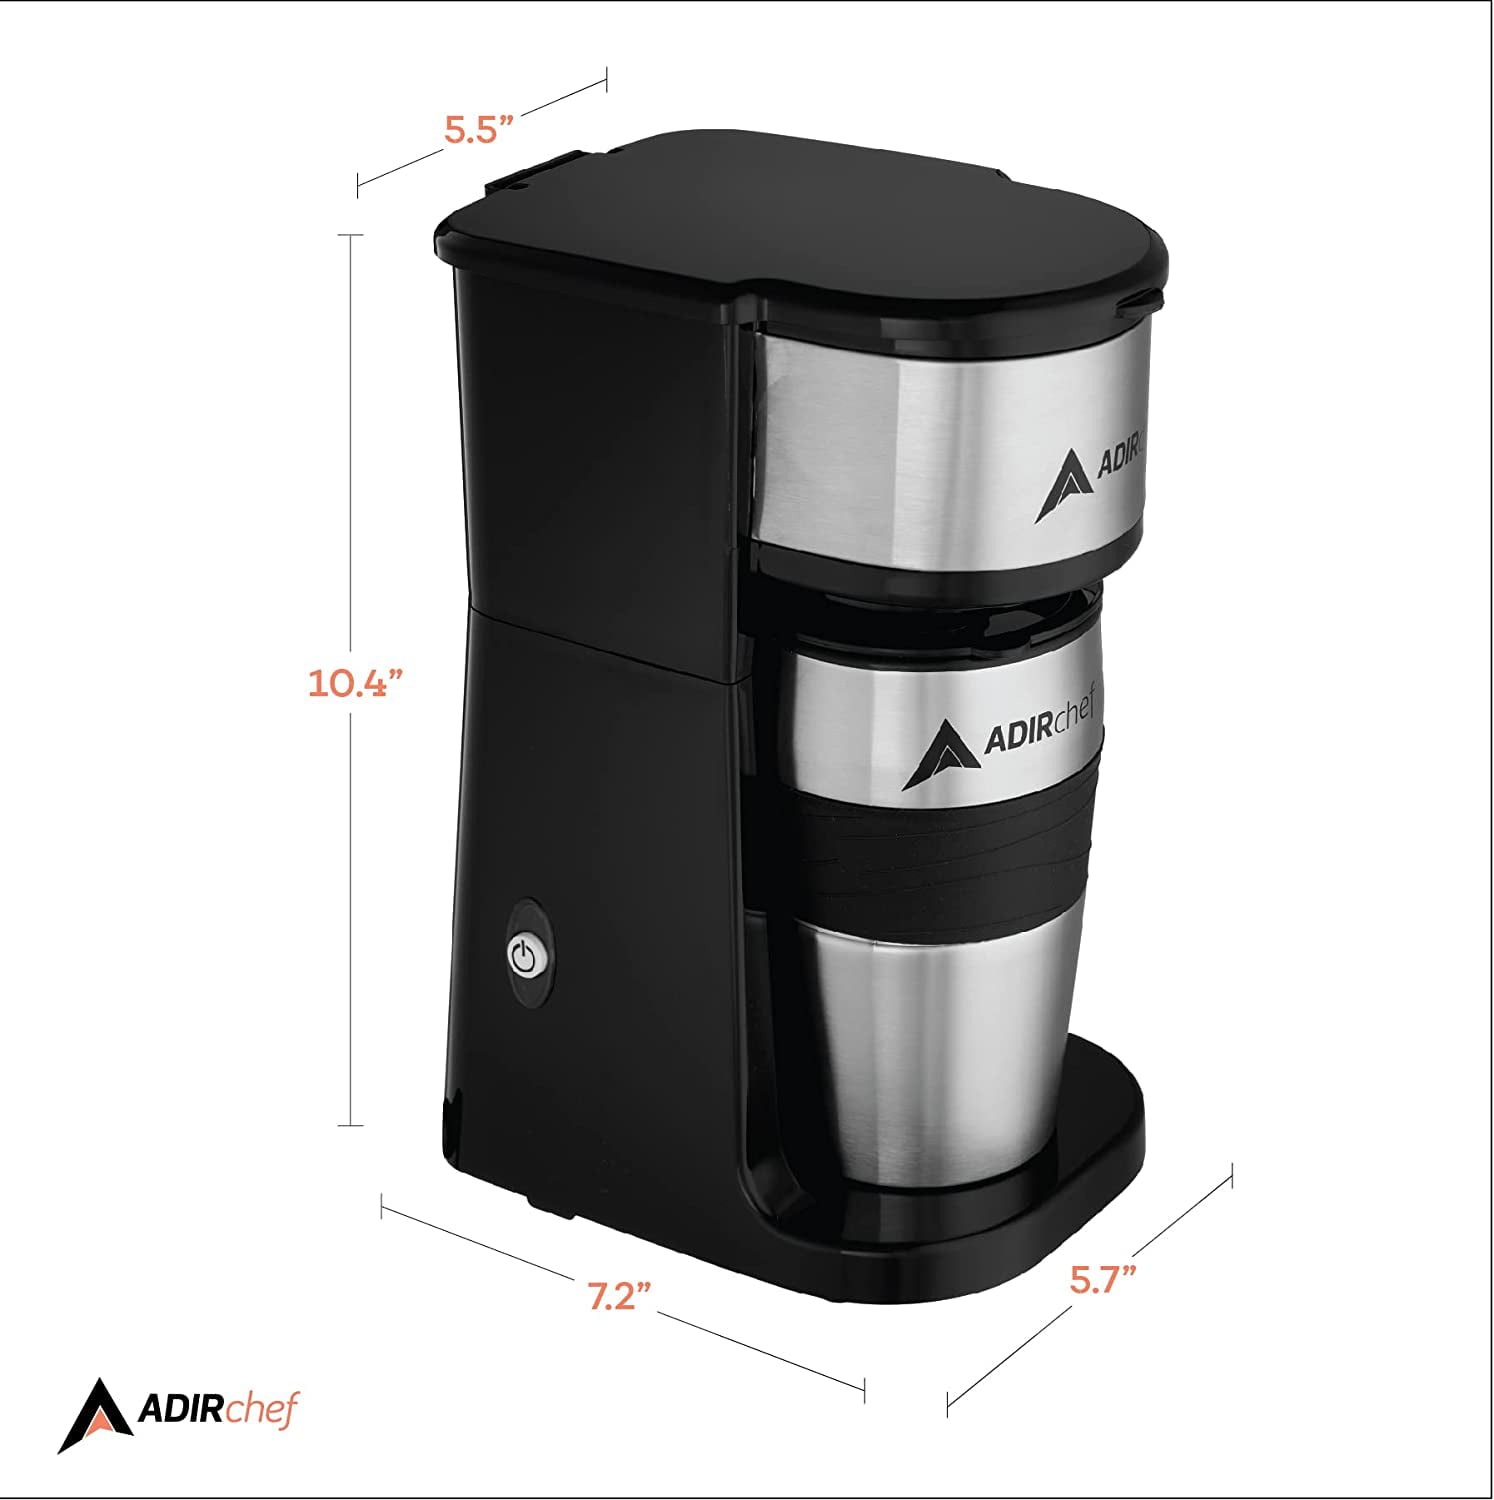  AdirChef Mini Coffee Maker - Single Serve Coffee Maker, 15 oz. Travel  Coffee Mug Coffee Tumbler & Reusable Coffee Filters - Ideal for Home,  Office, Outdoor & More - Blue: Home & Kitchen